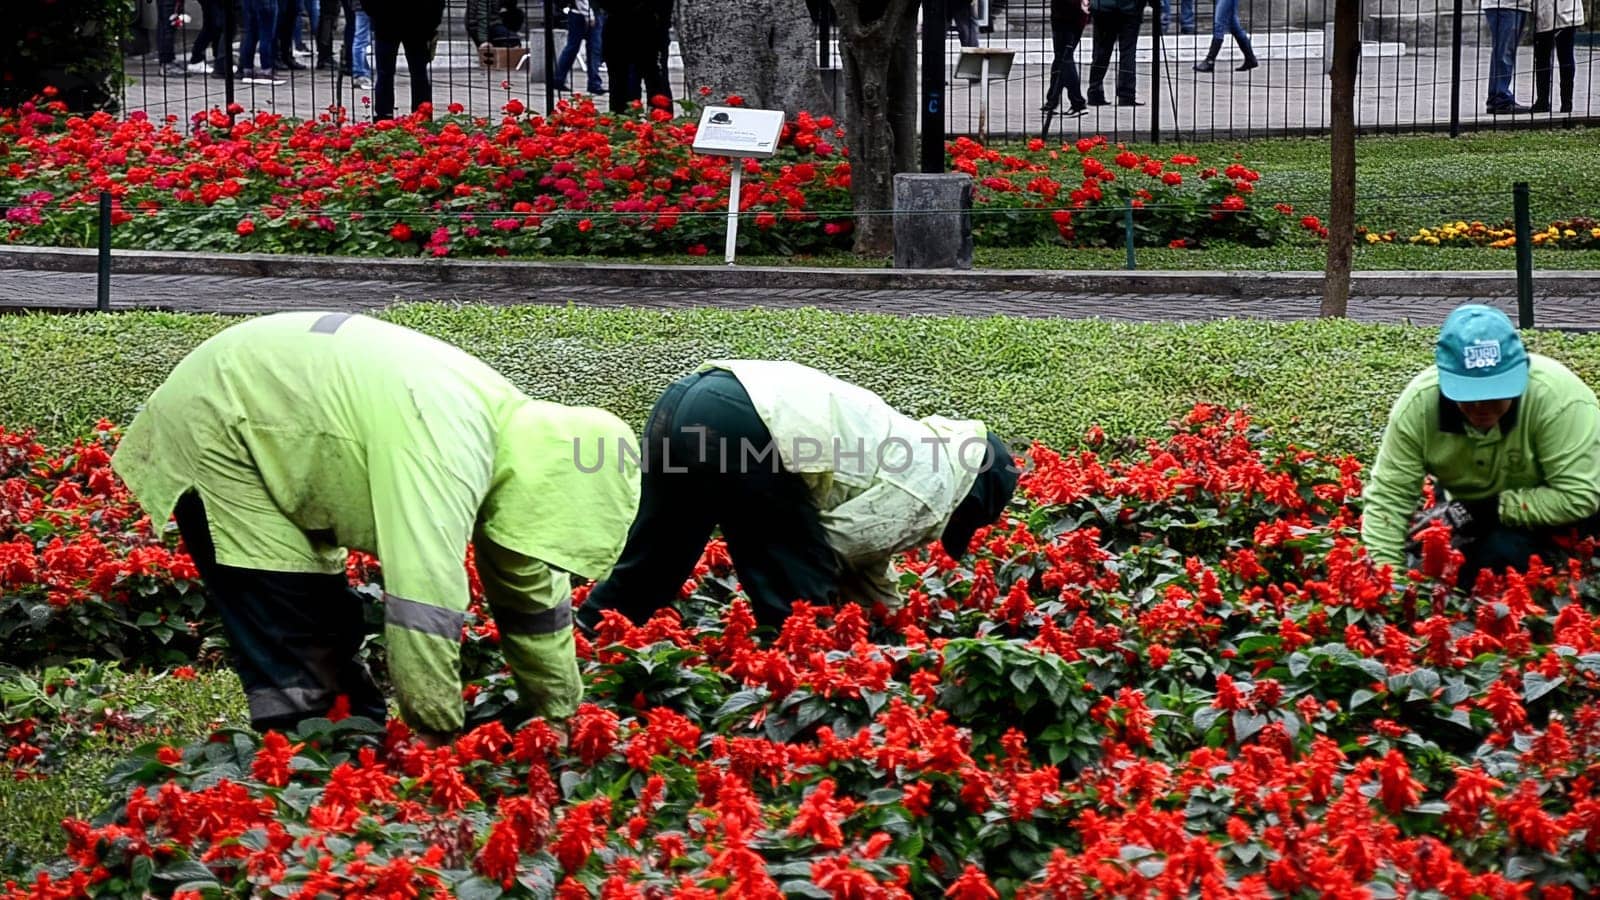 Lima, Peru - September 18th 2019 : Two gardeners in green uniforms caring for bright red flowers in a lush city park setting